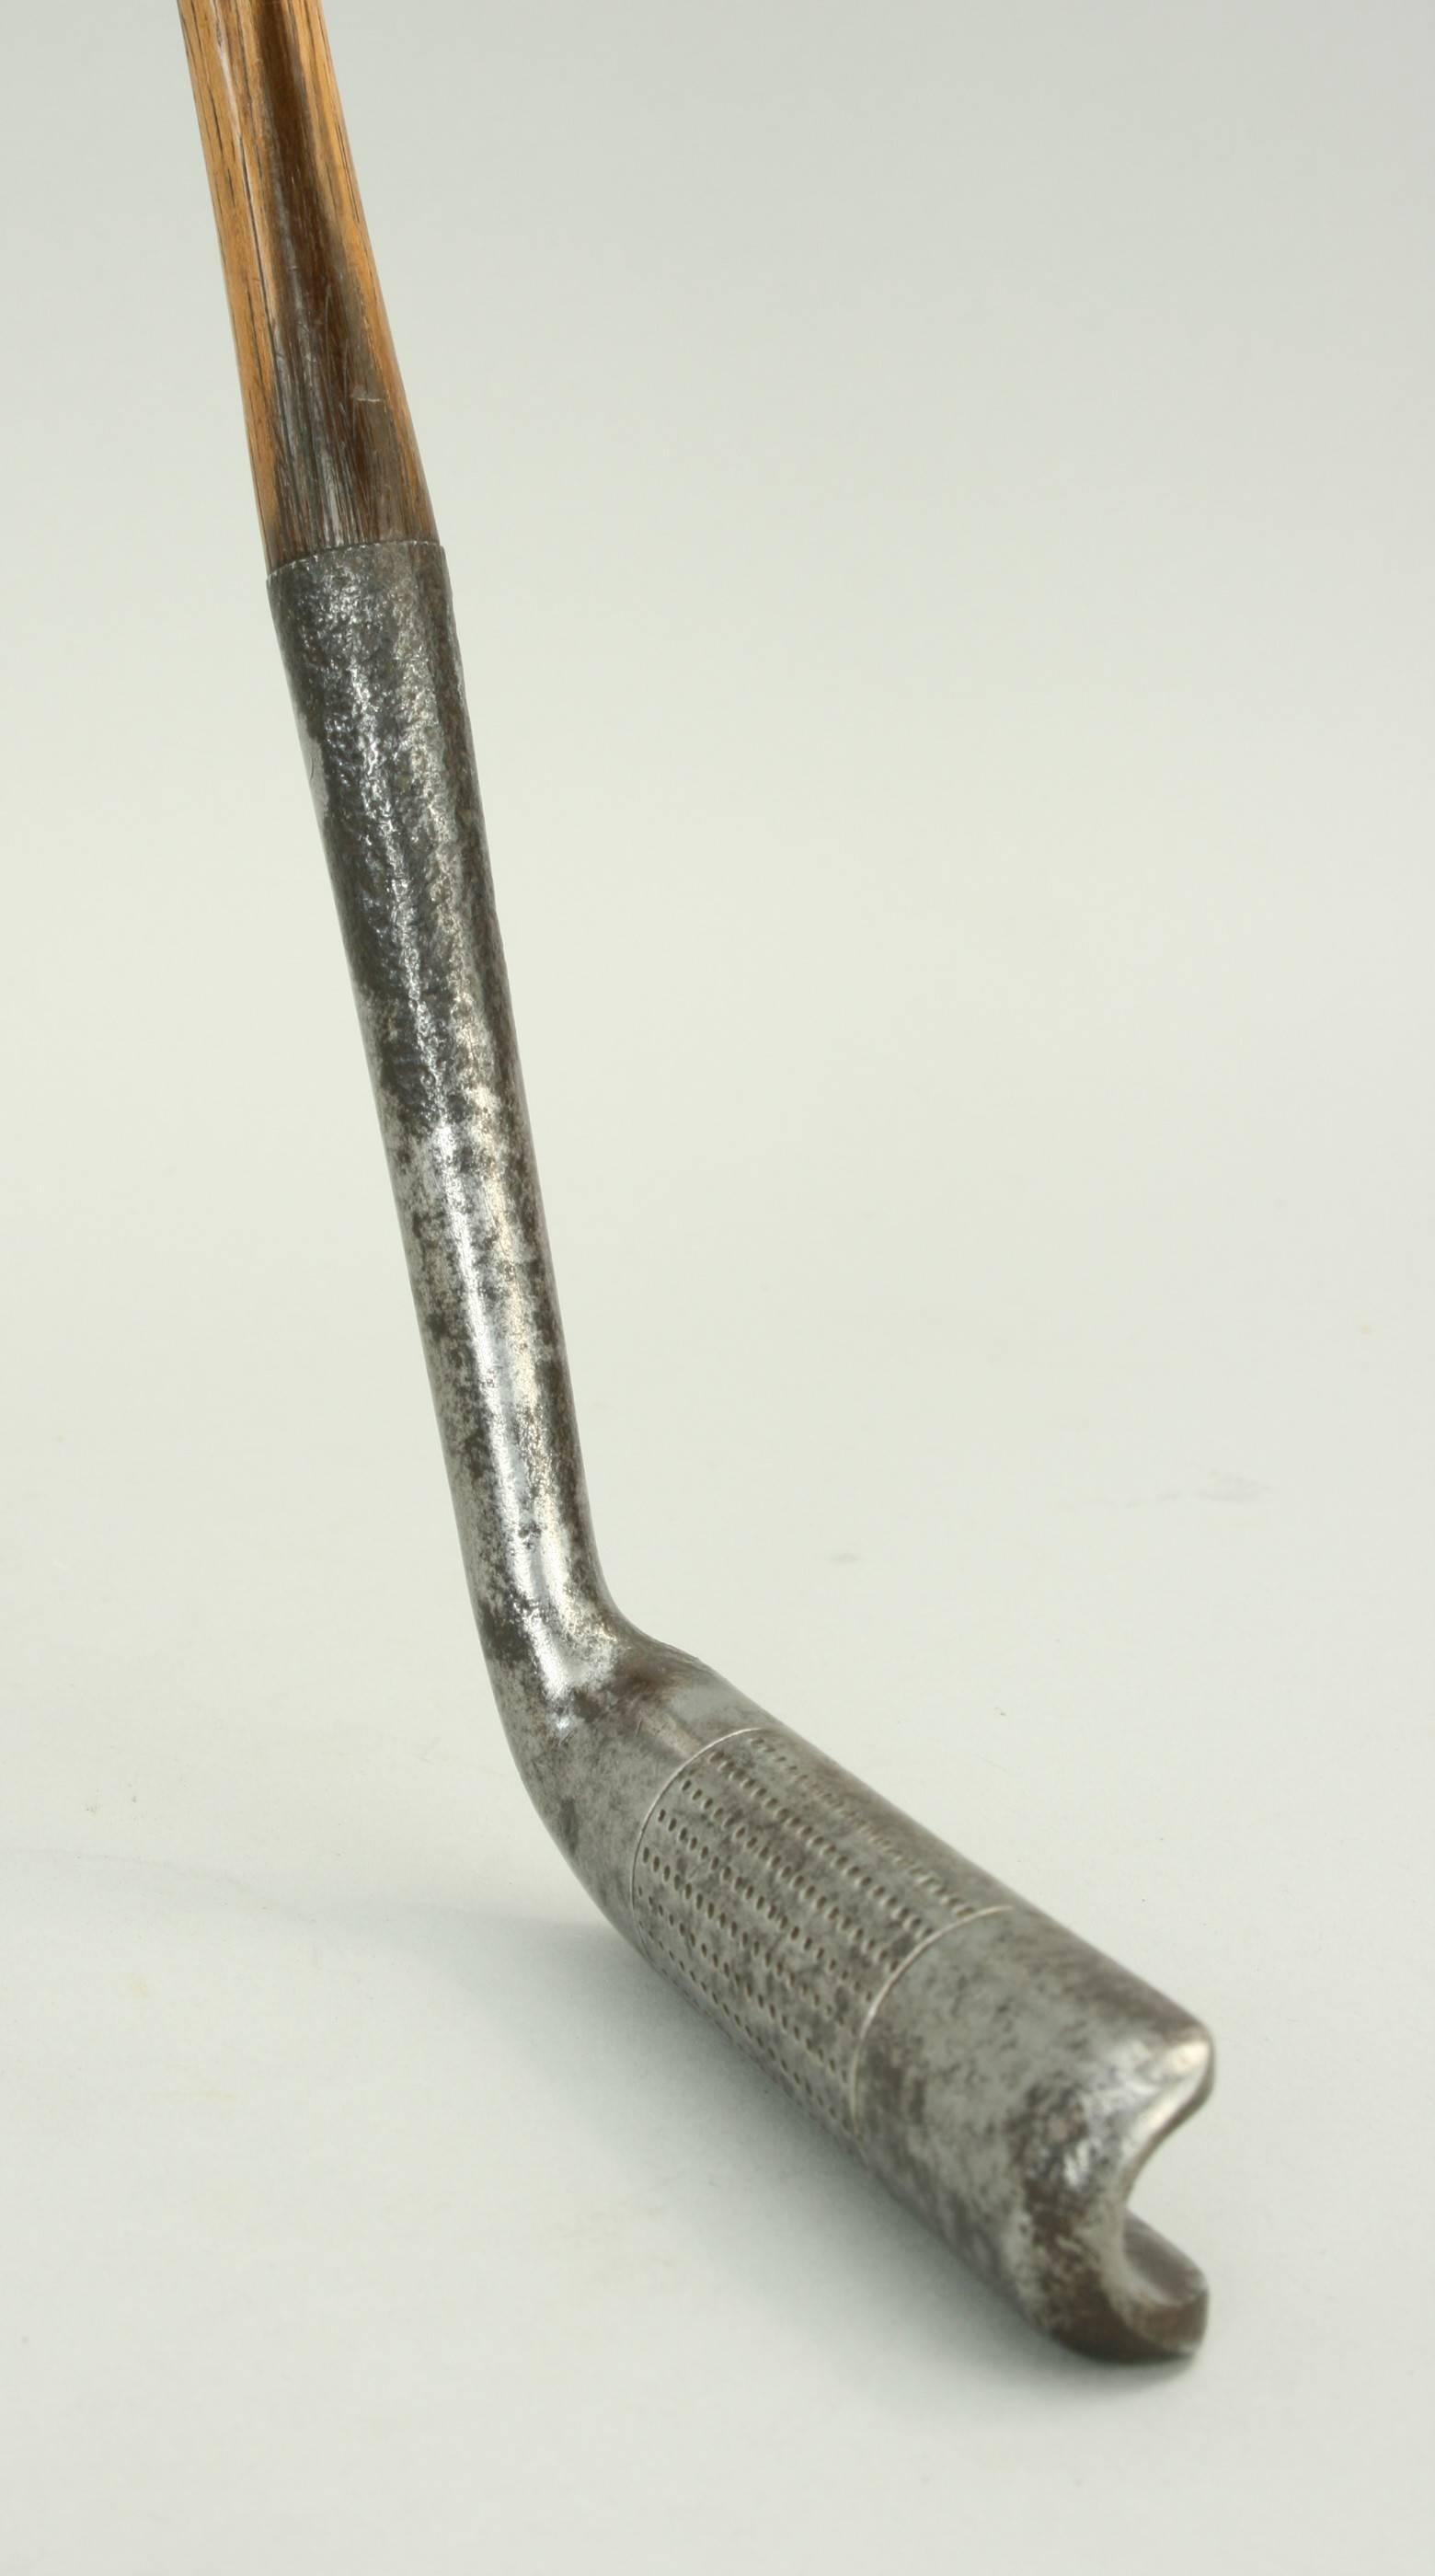 An unusual left-handed Perwhit putter by Hendry and Bishop with a cylinder face with hand punched face markings. The club has a hickory shaft with a polished leather grip. The recess in the back of the blade is stamped "The PerWhit Putter, Pat